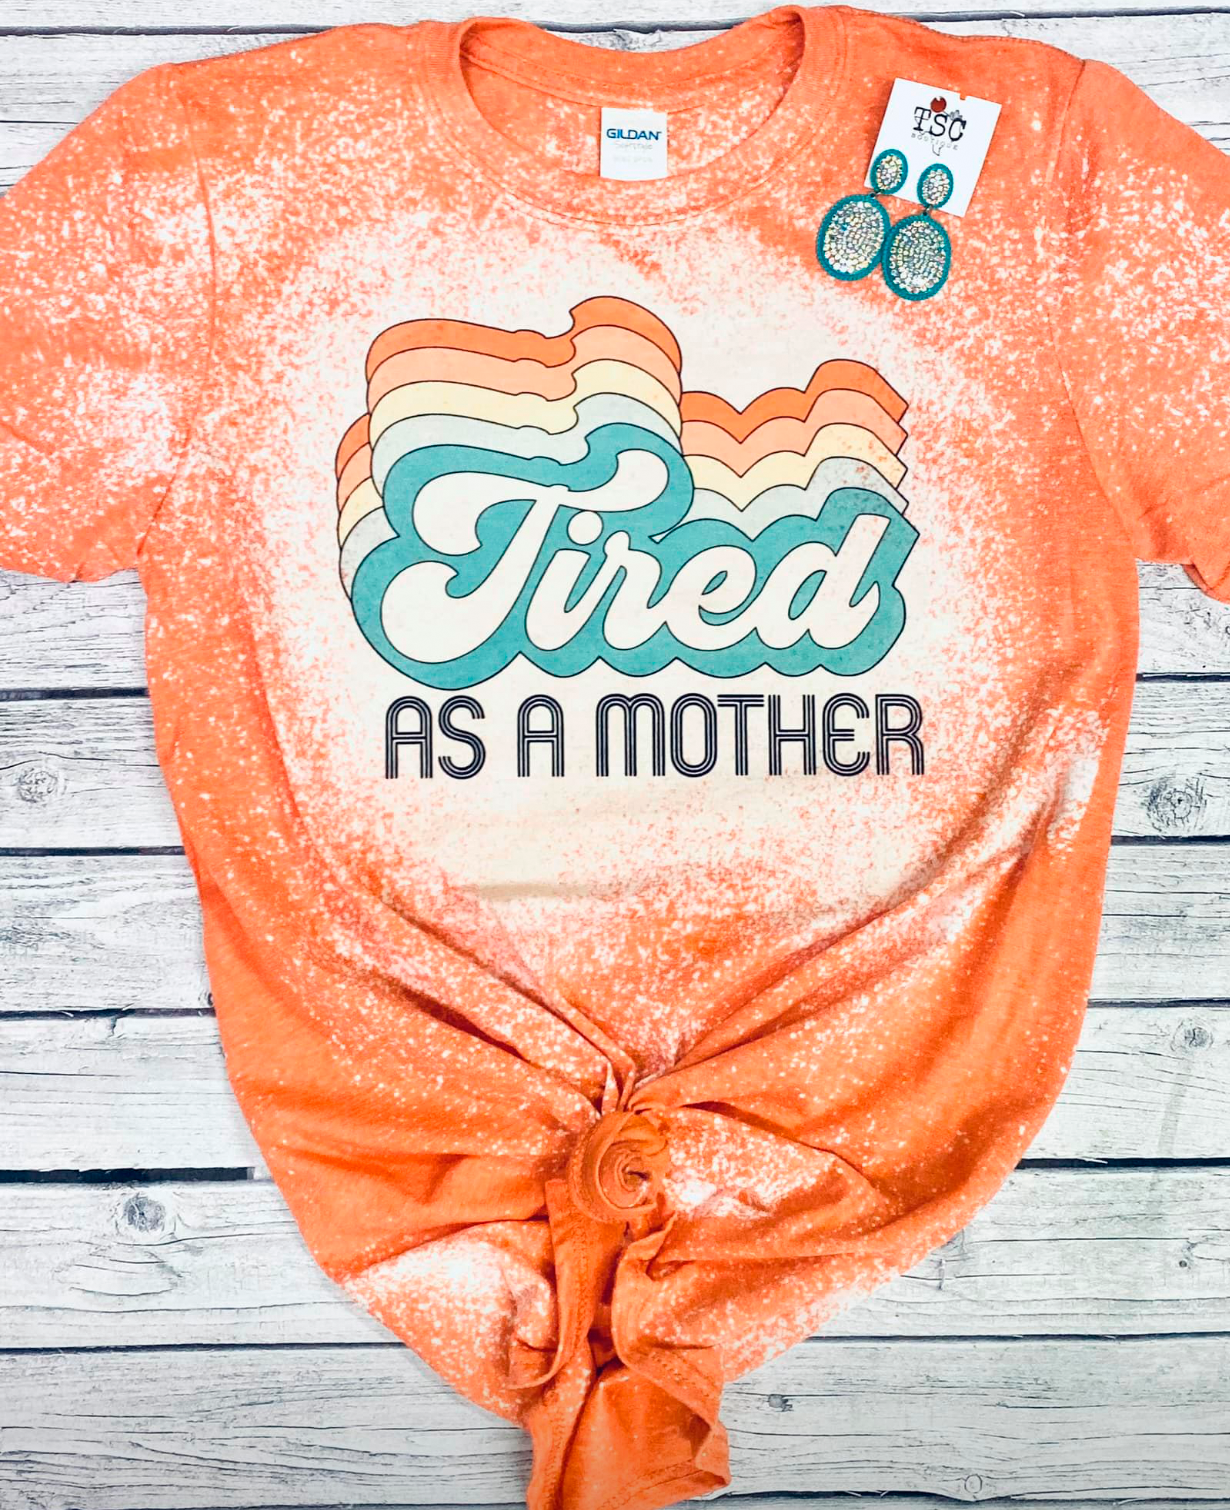 Tired as a Mother Tee